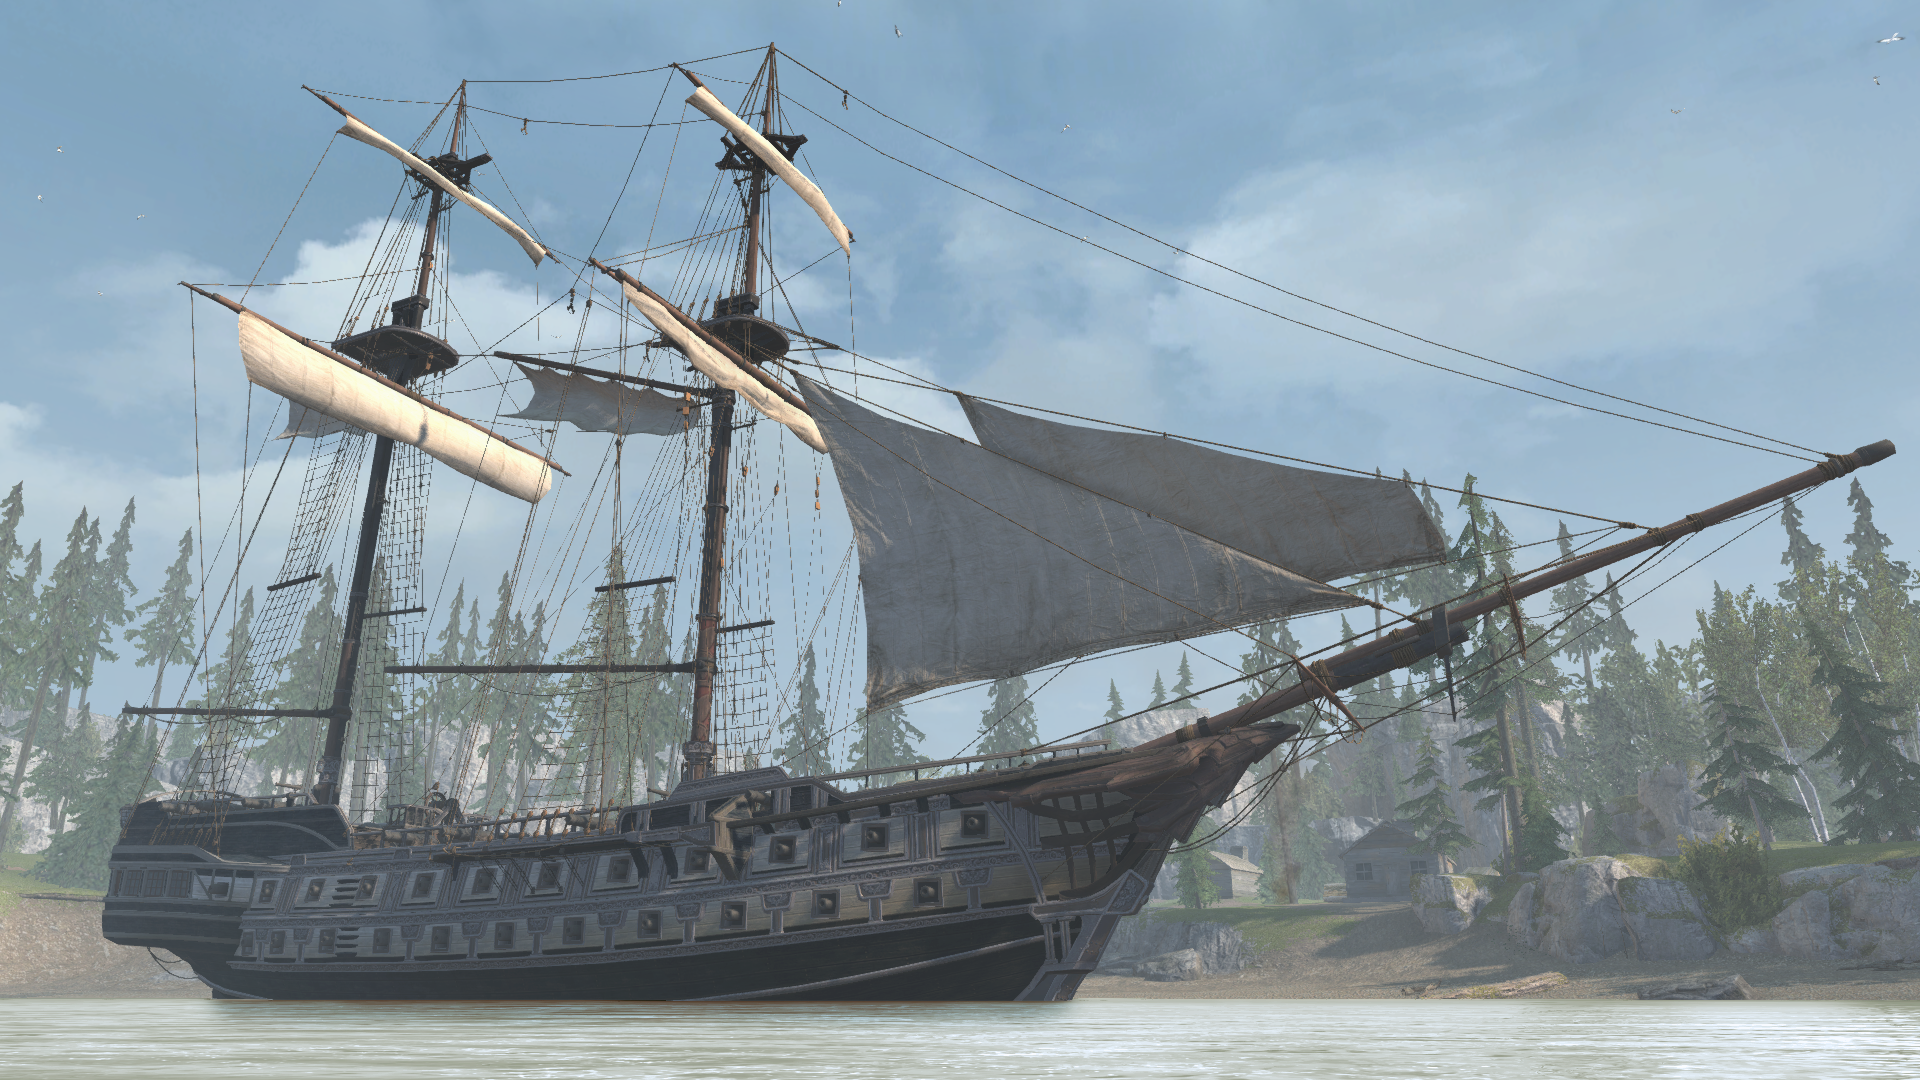 Assassin's Creed Rogue review: It might not match Unity, but it's nothing  but plain sailing for fans, The Independent